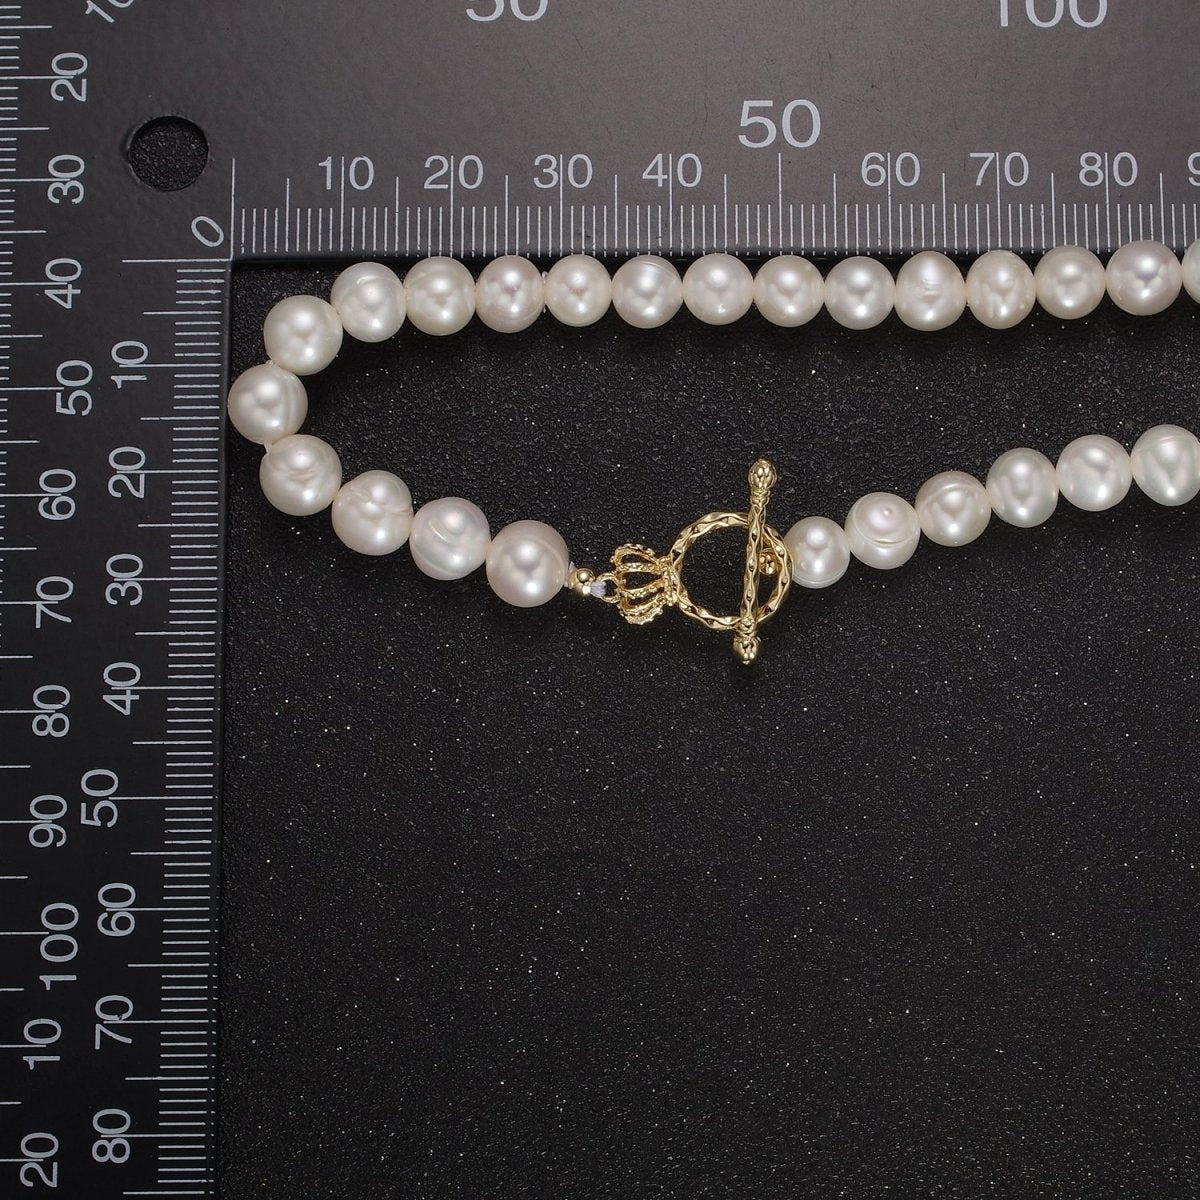 Fresh Water Pearl necklace, T bar necklace, toggle bar necklace, dainty gold necklace, layering necklace, pearl jewelry | WA-869 WA-1161 Clearance Pricing - DLUXCA